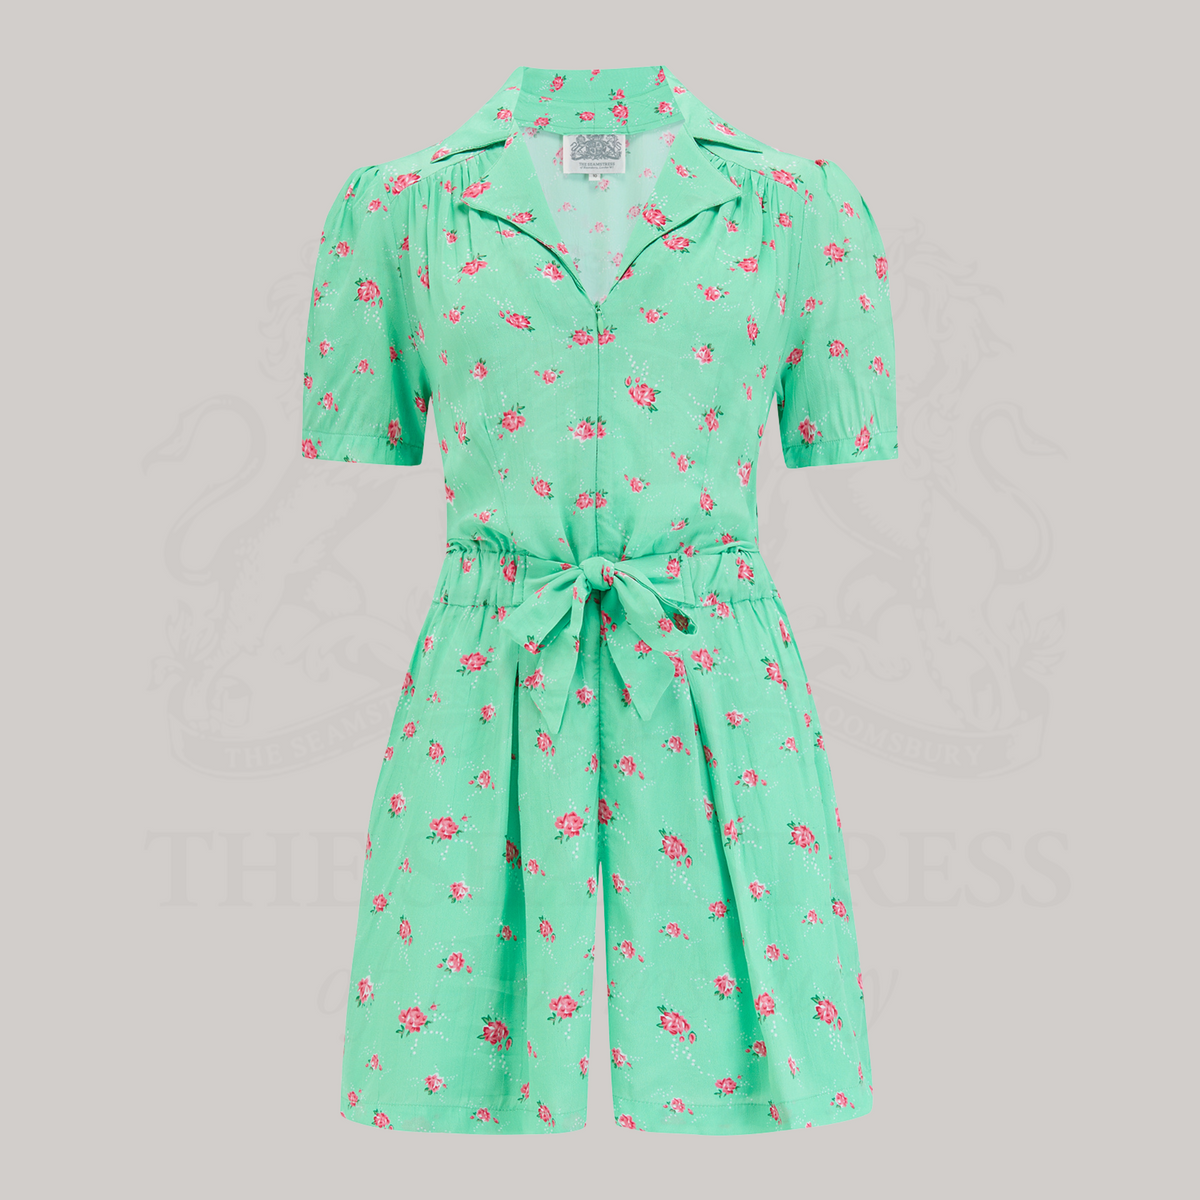 Emma Playsuit in Mint Rose